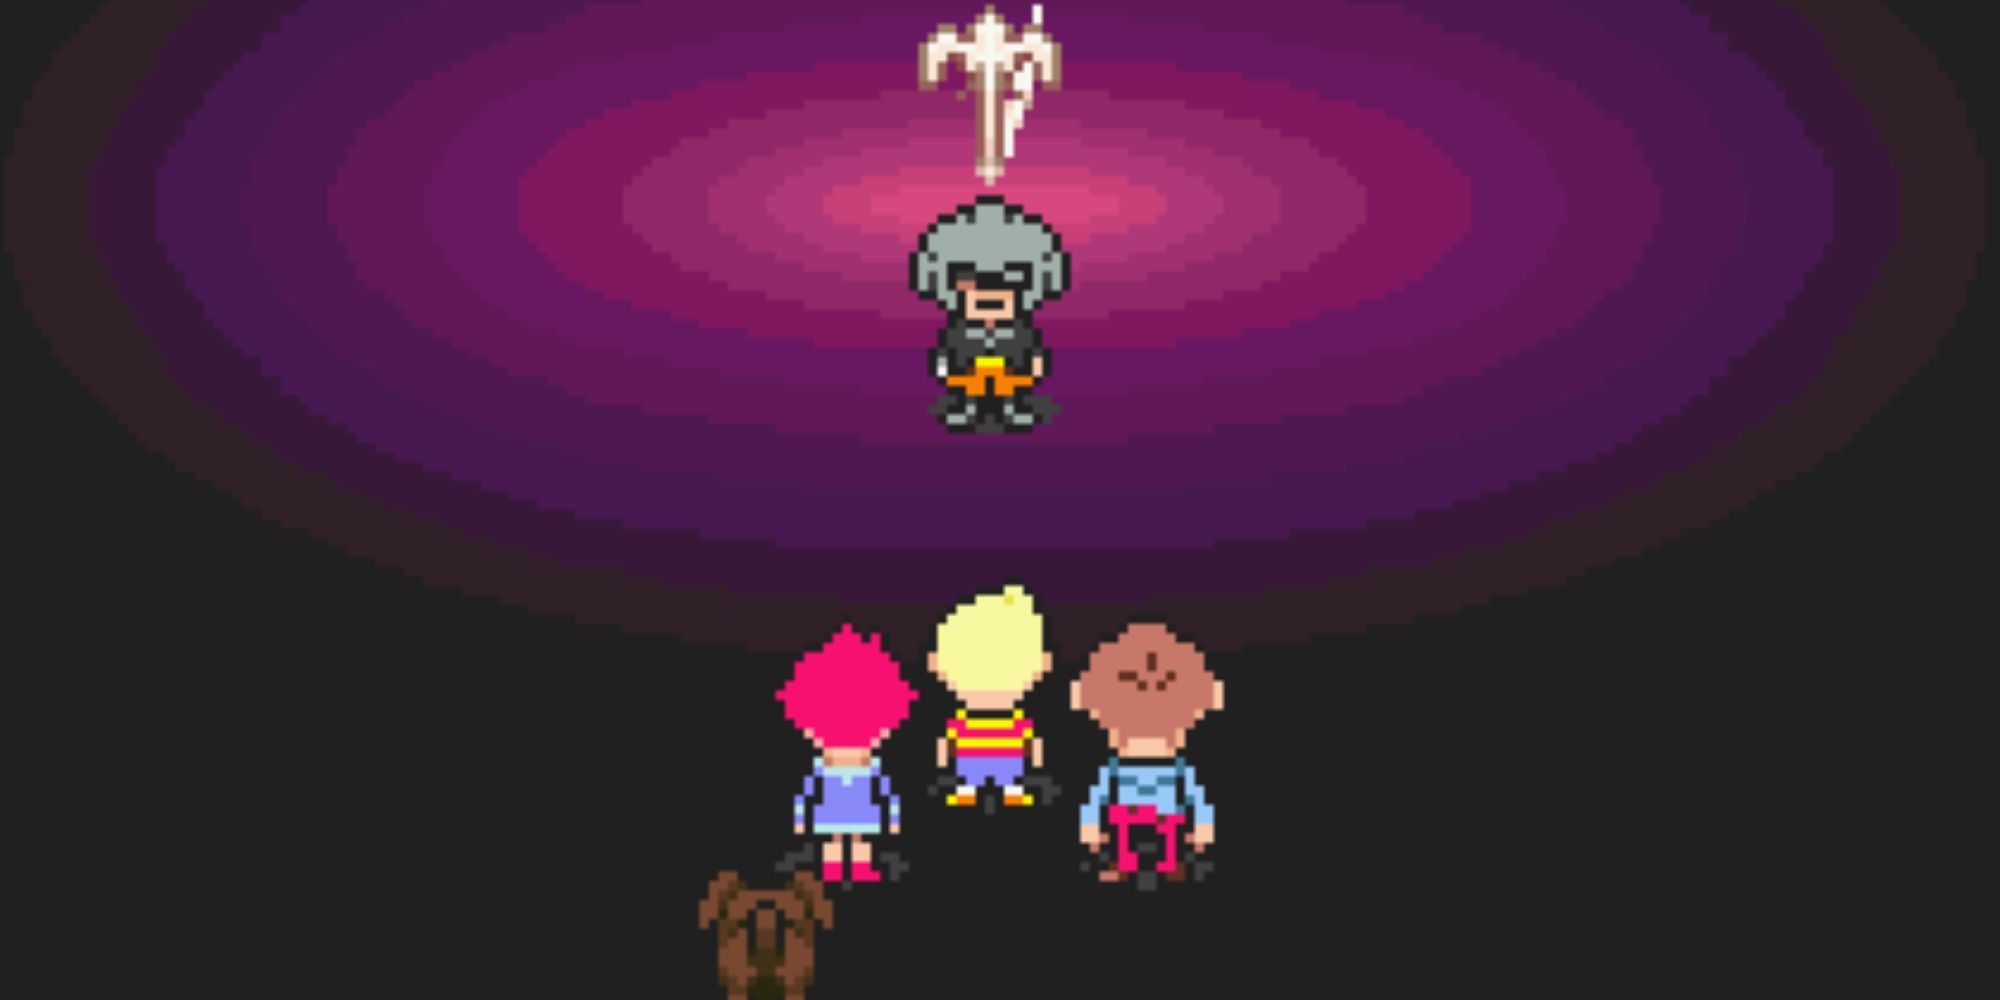 The Final Boss in Mother 3